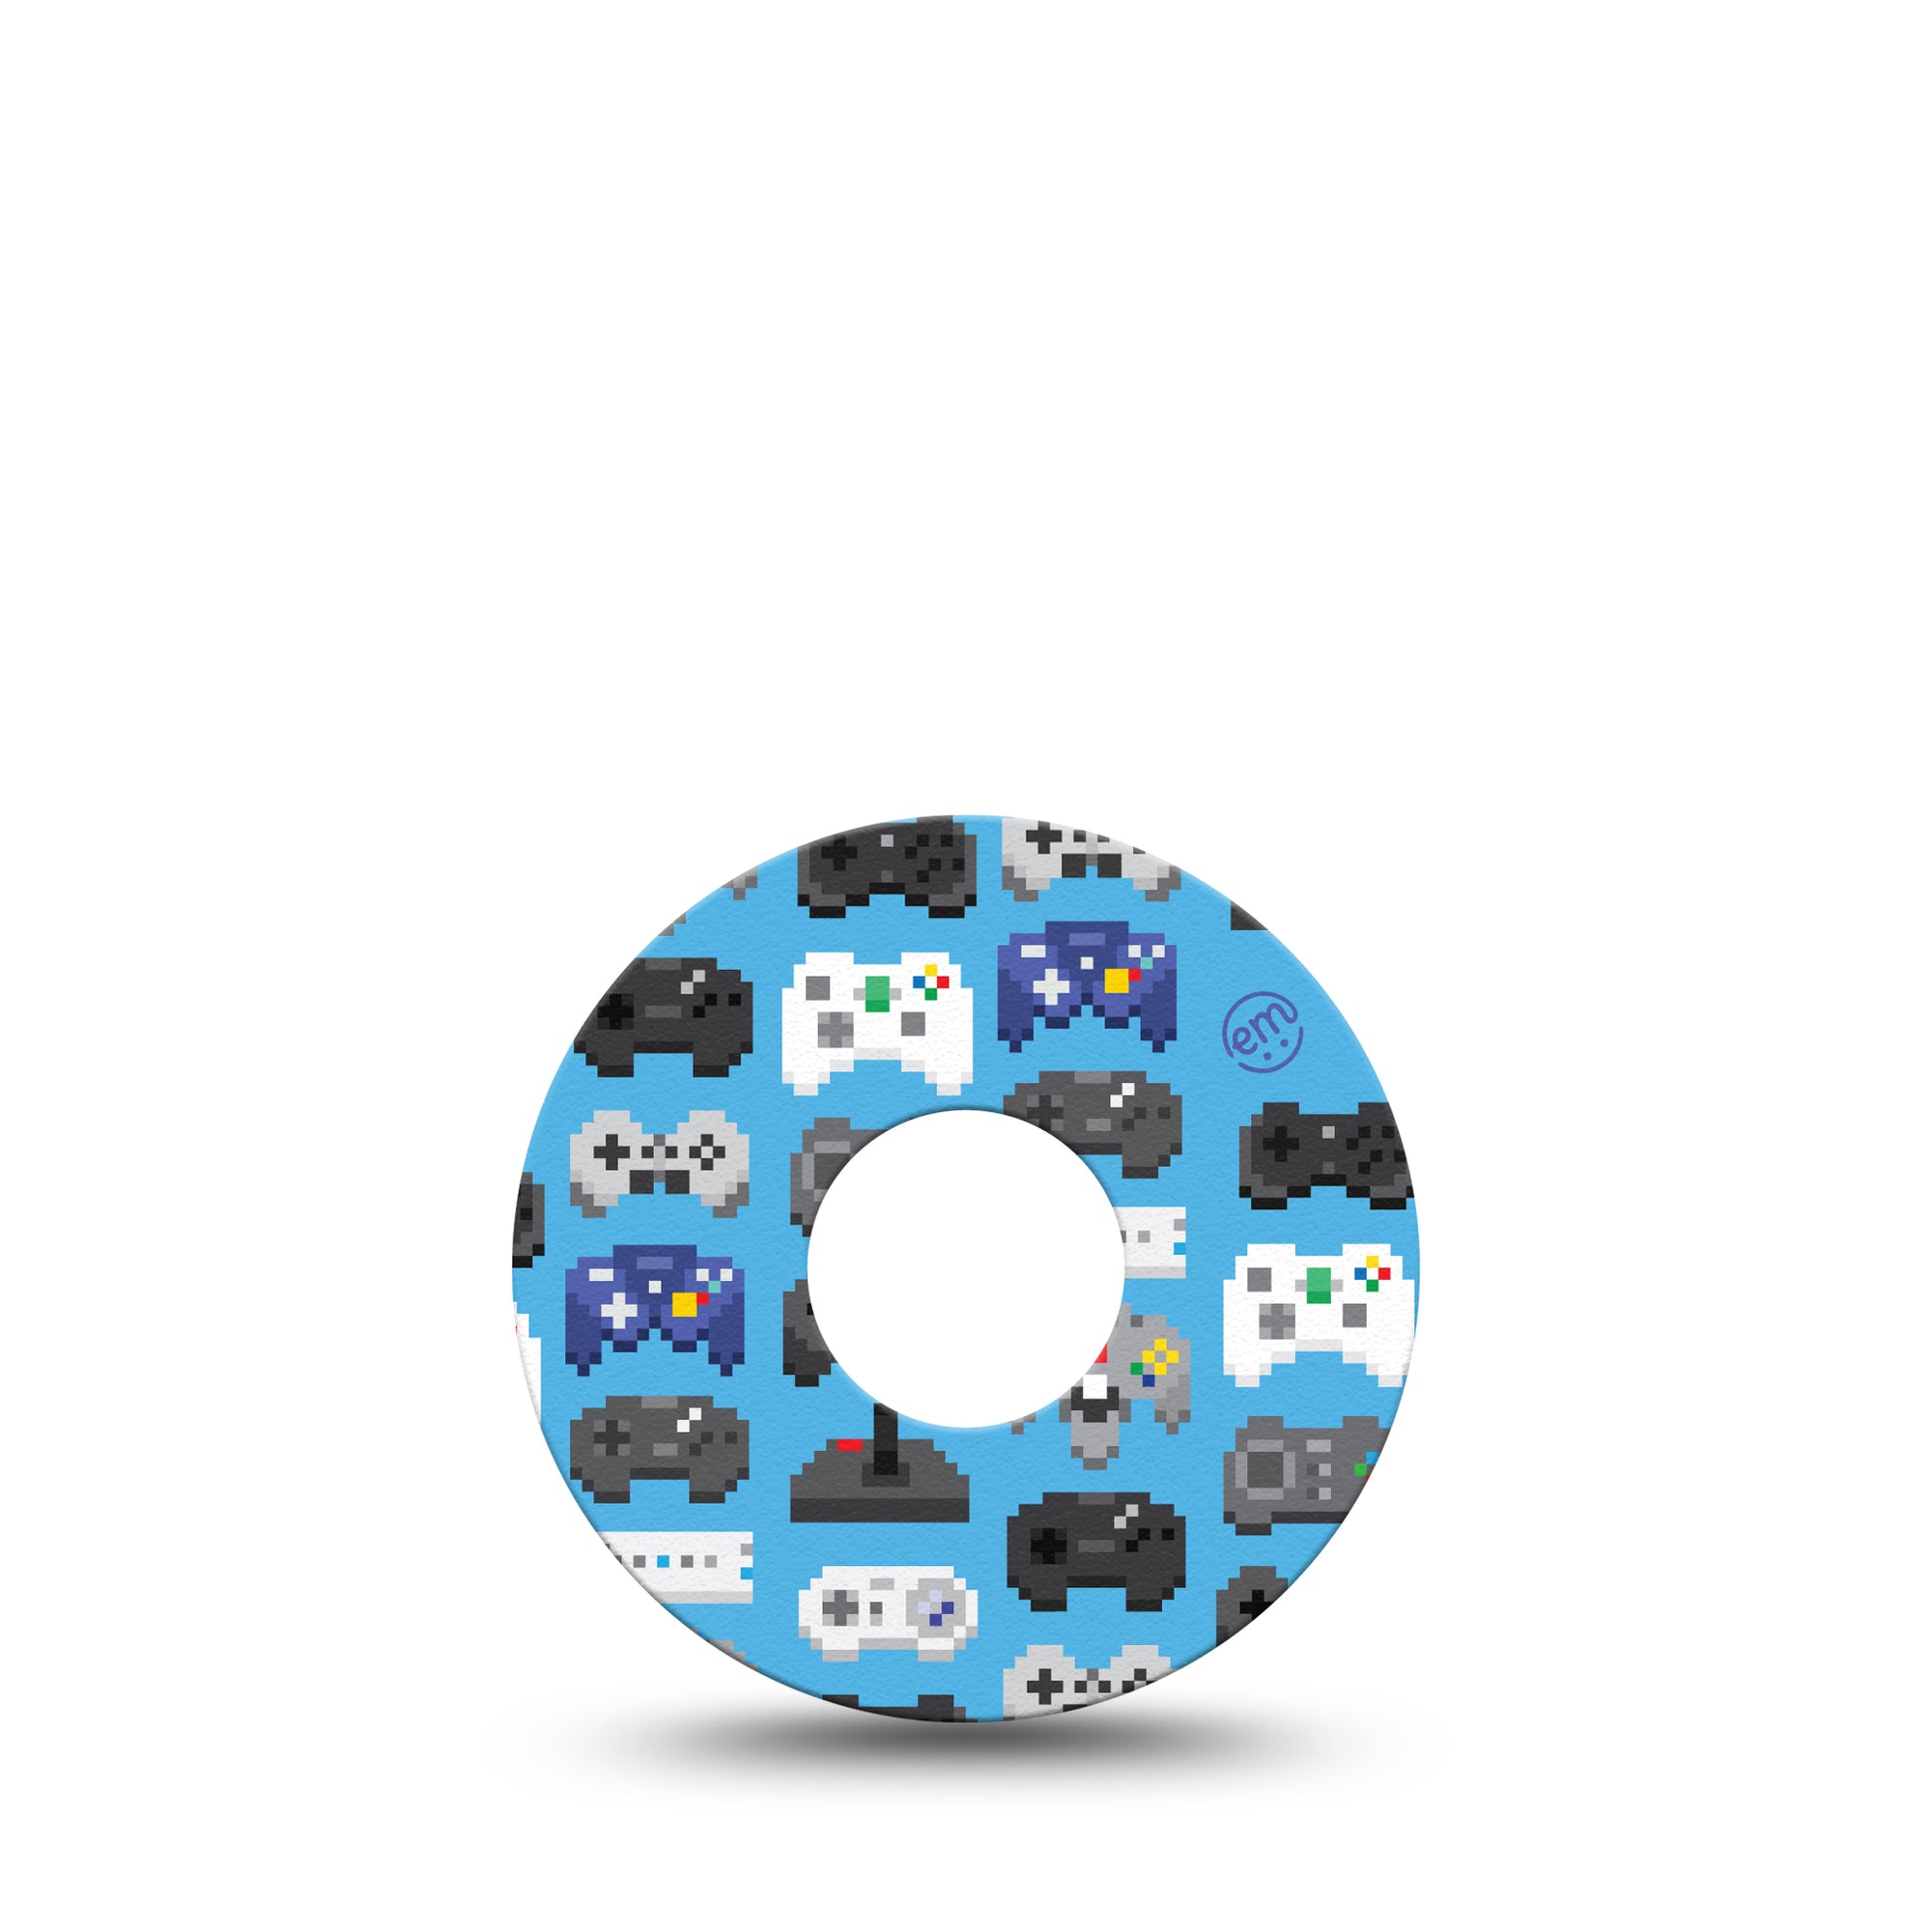 ExpressionMed Gamer Libre 3 Tape, Single, 8 Bit Gaming Controller Themed, CGM Overlay Patch Design